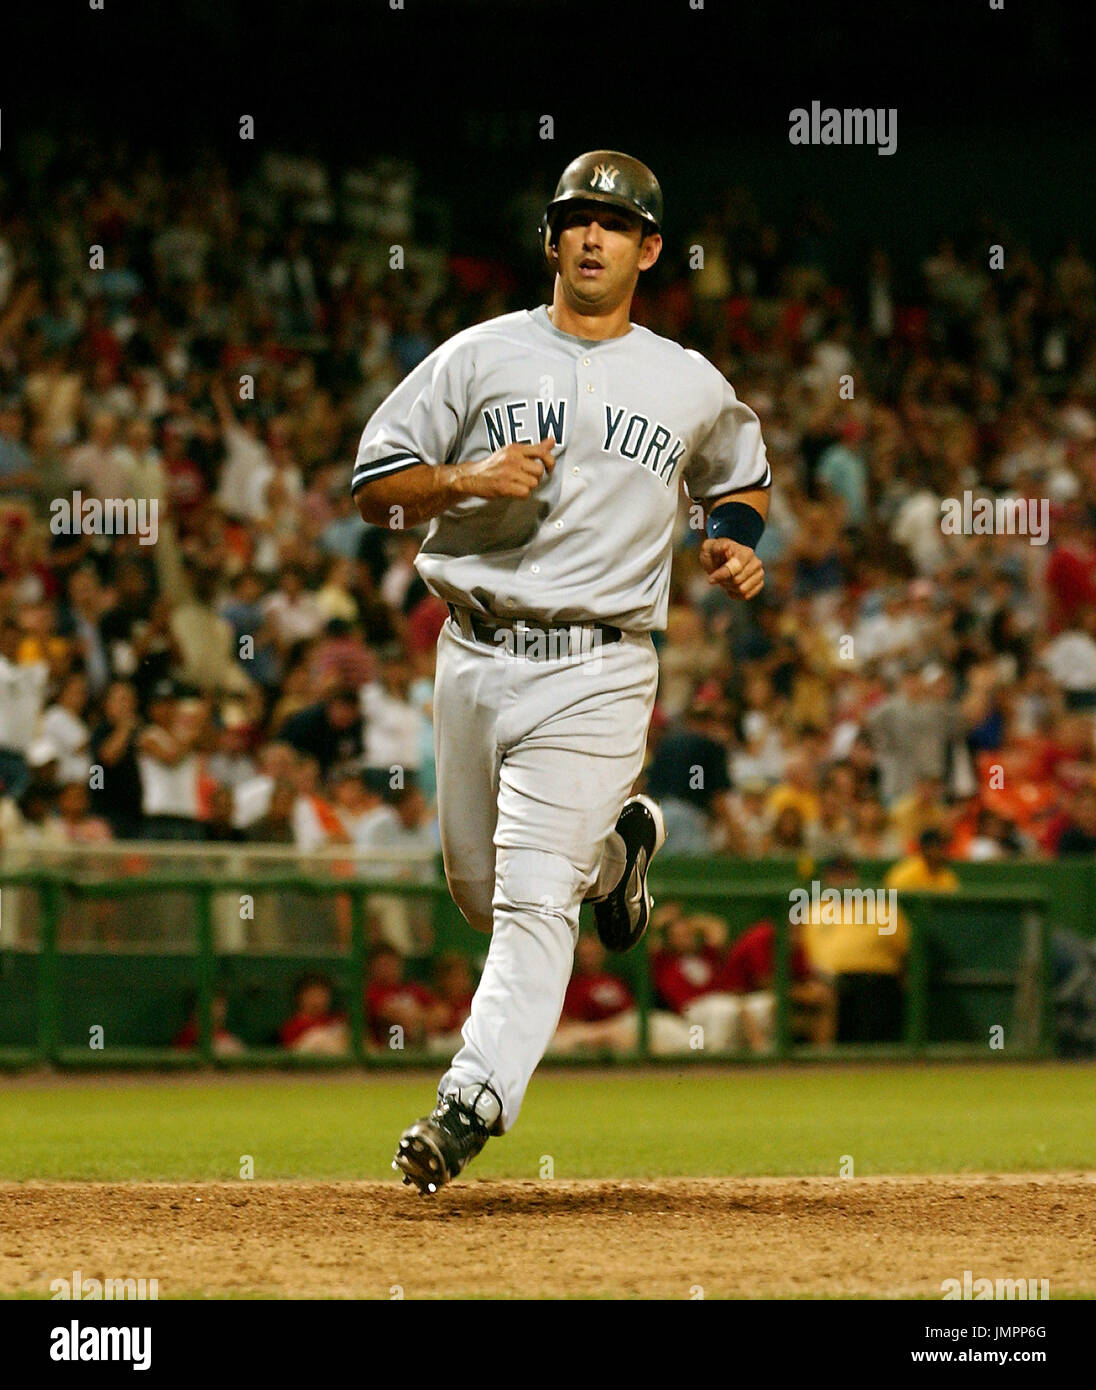 Washington, D.C. - June 16, 2006 -- New York Yankees catcher Jorge Posada (20) scores the insurance run in the ninth inning against the Washington Nationals at RFK Stadium in Washington, D.C. on June 16, 2006.  The Yankees won the game 7 - 5. Credit: Ron Sachs / CNP Stock Photo